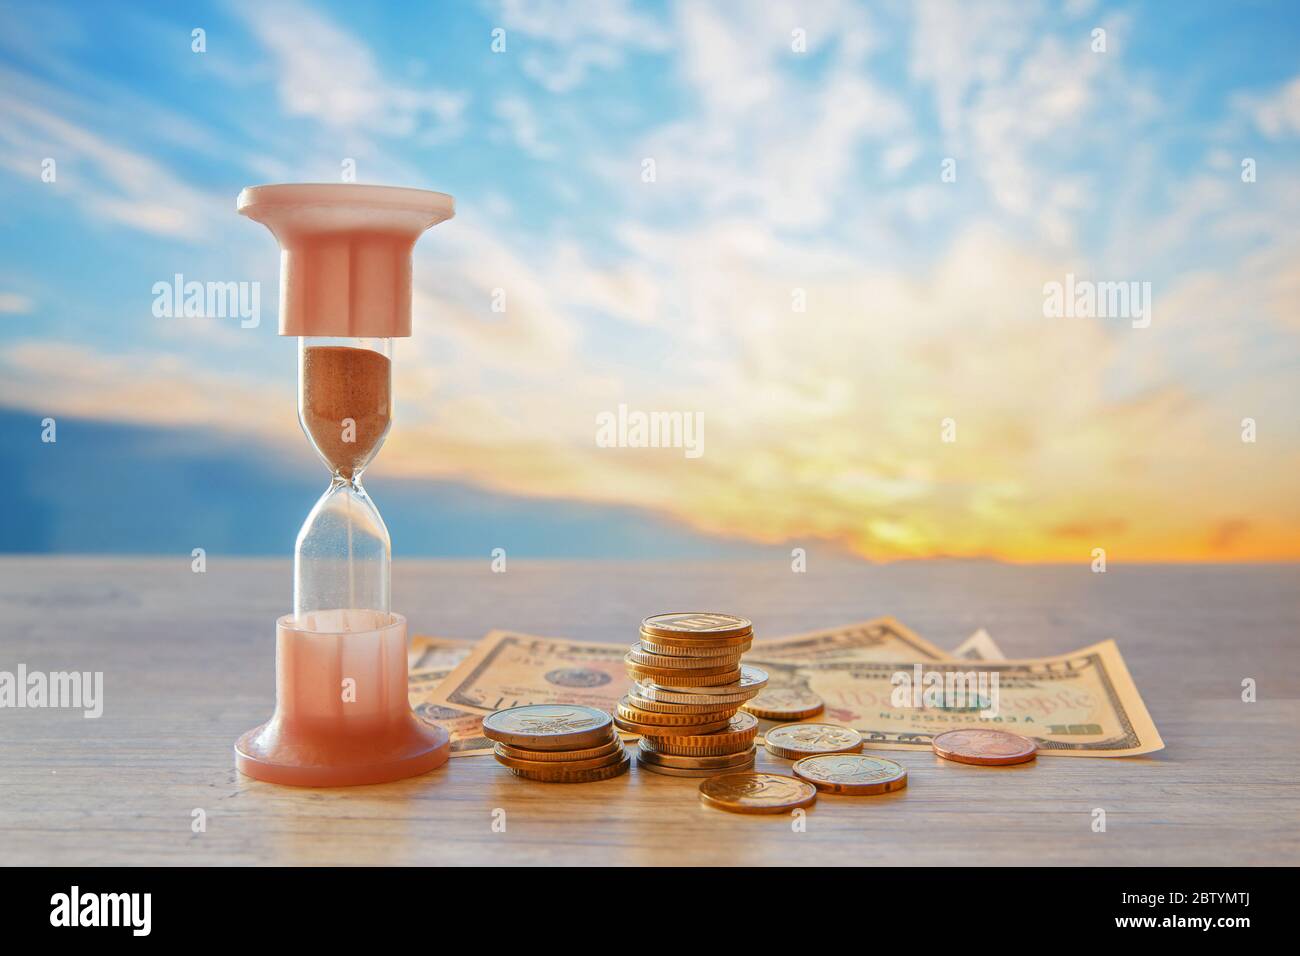 Time is money. Financial concept of money with a clock and coins of different countries. Hourglass. Stock Photo